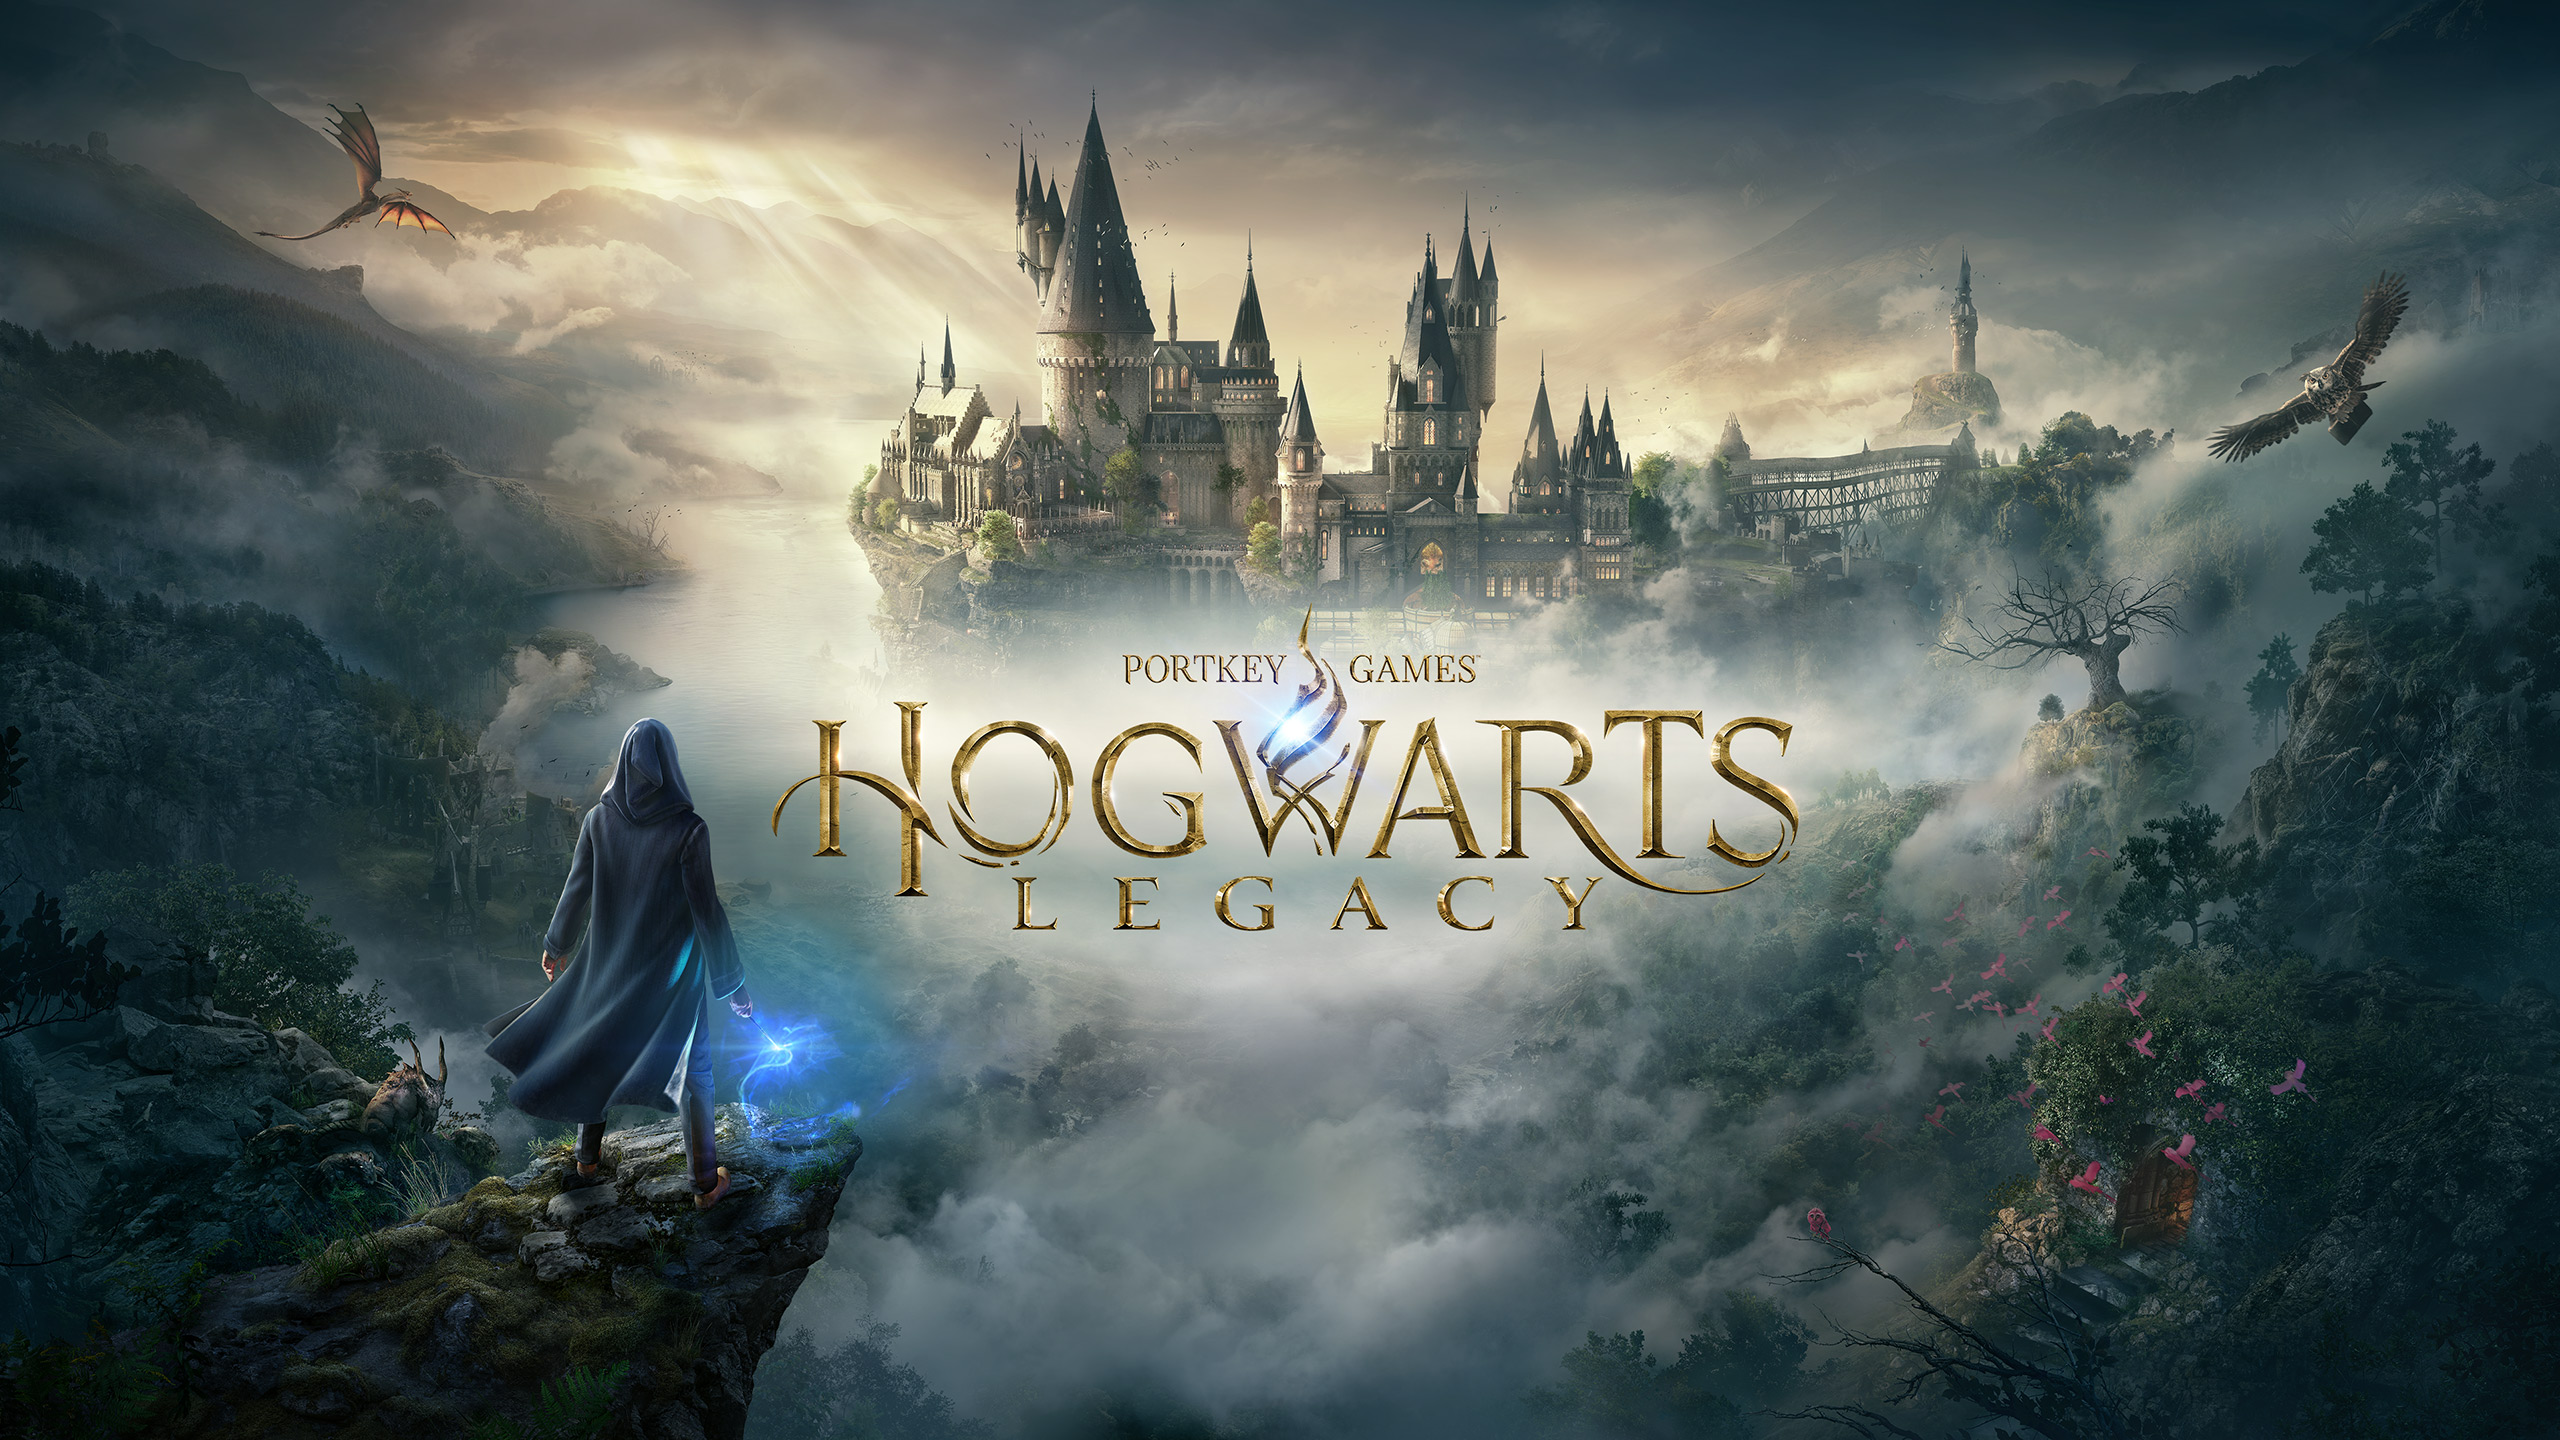 Hogwarts Legacy opens early access today